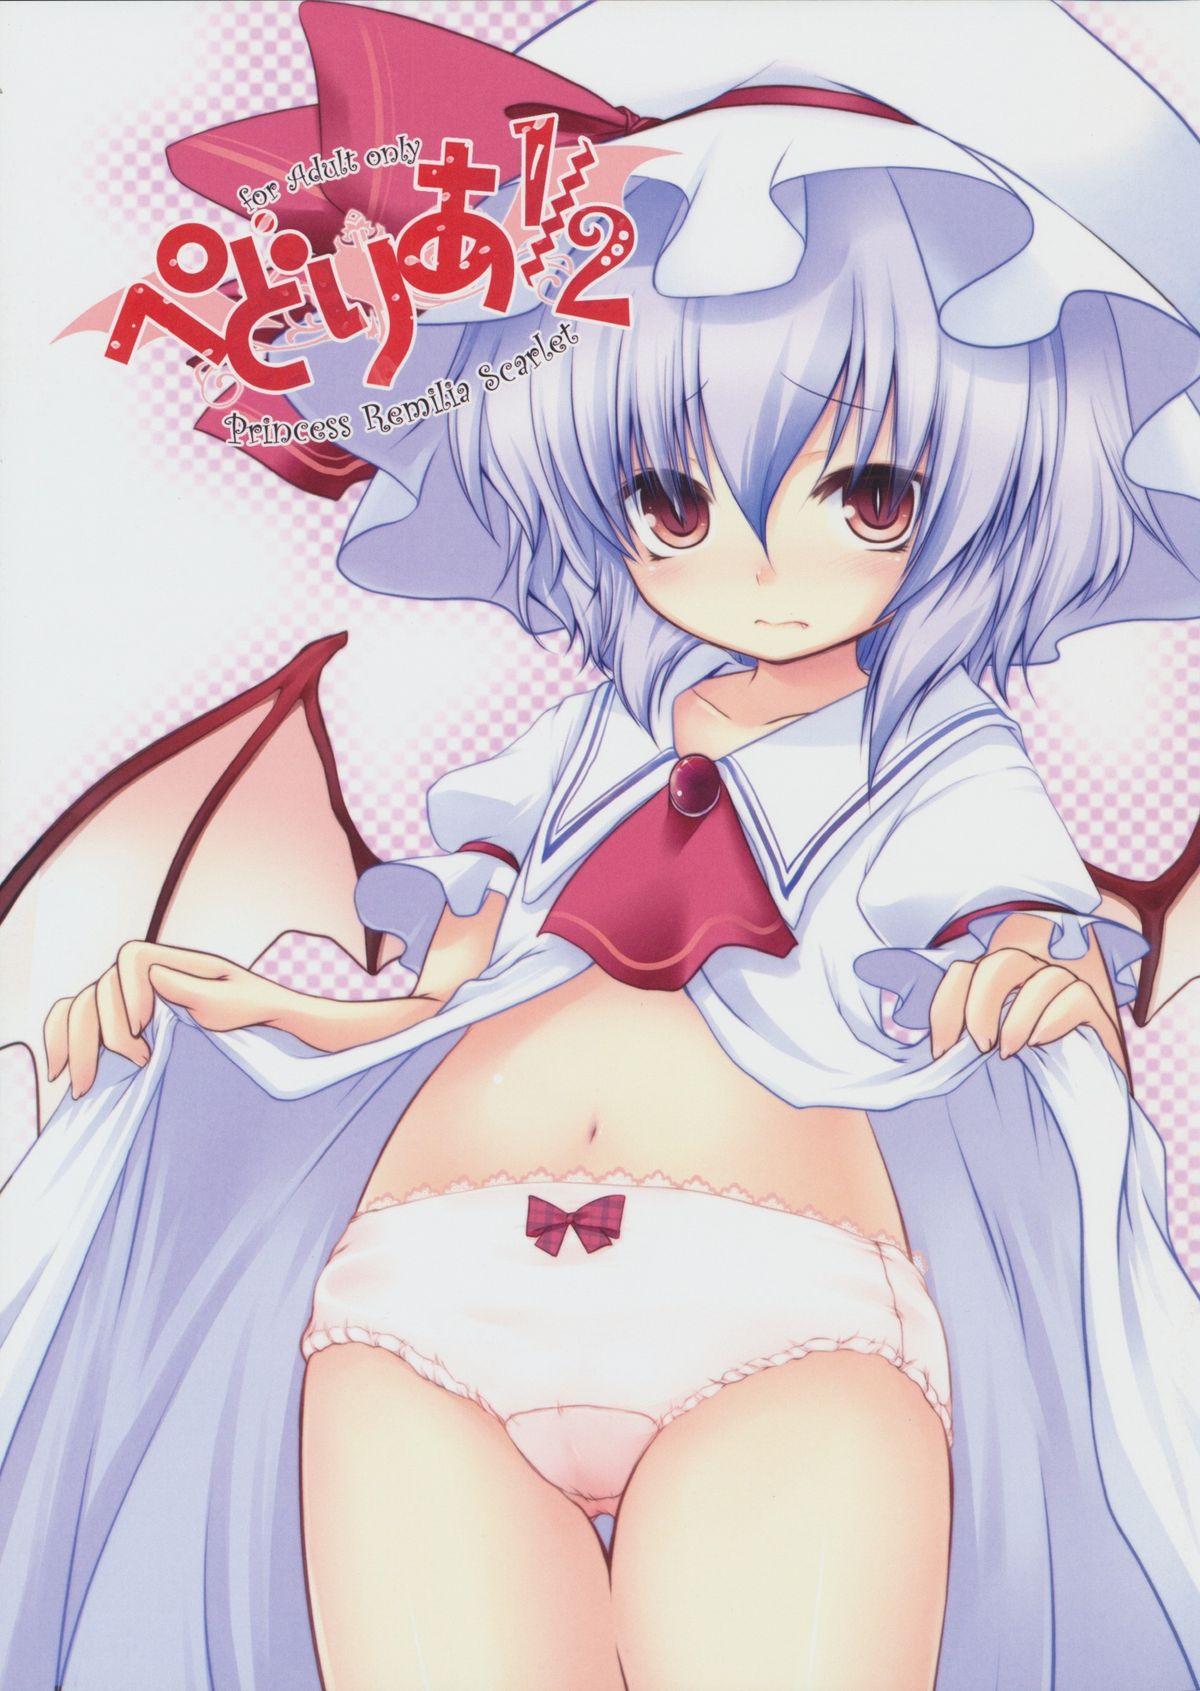 Bigbooty Pedolia 1/2 Princess Remilia Scarlet - Touhou project Hottie - Picture 1